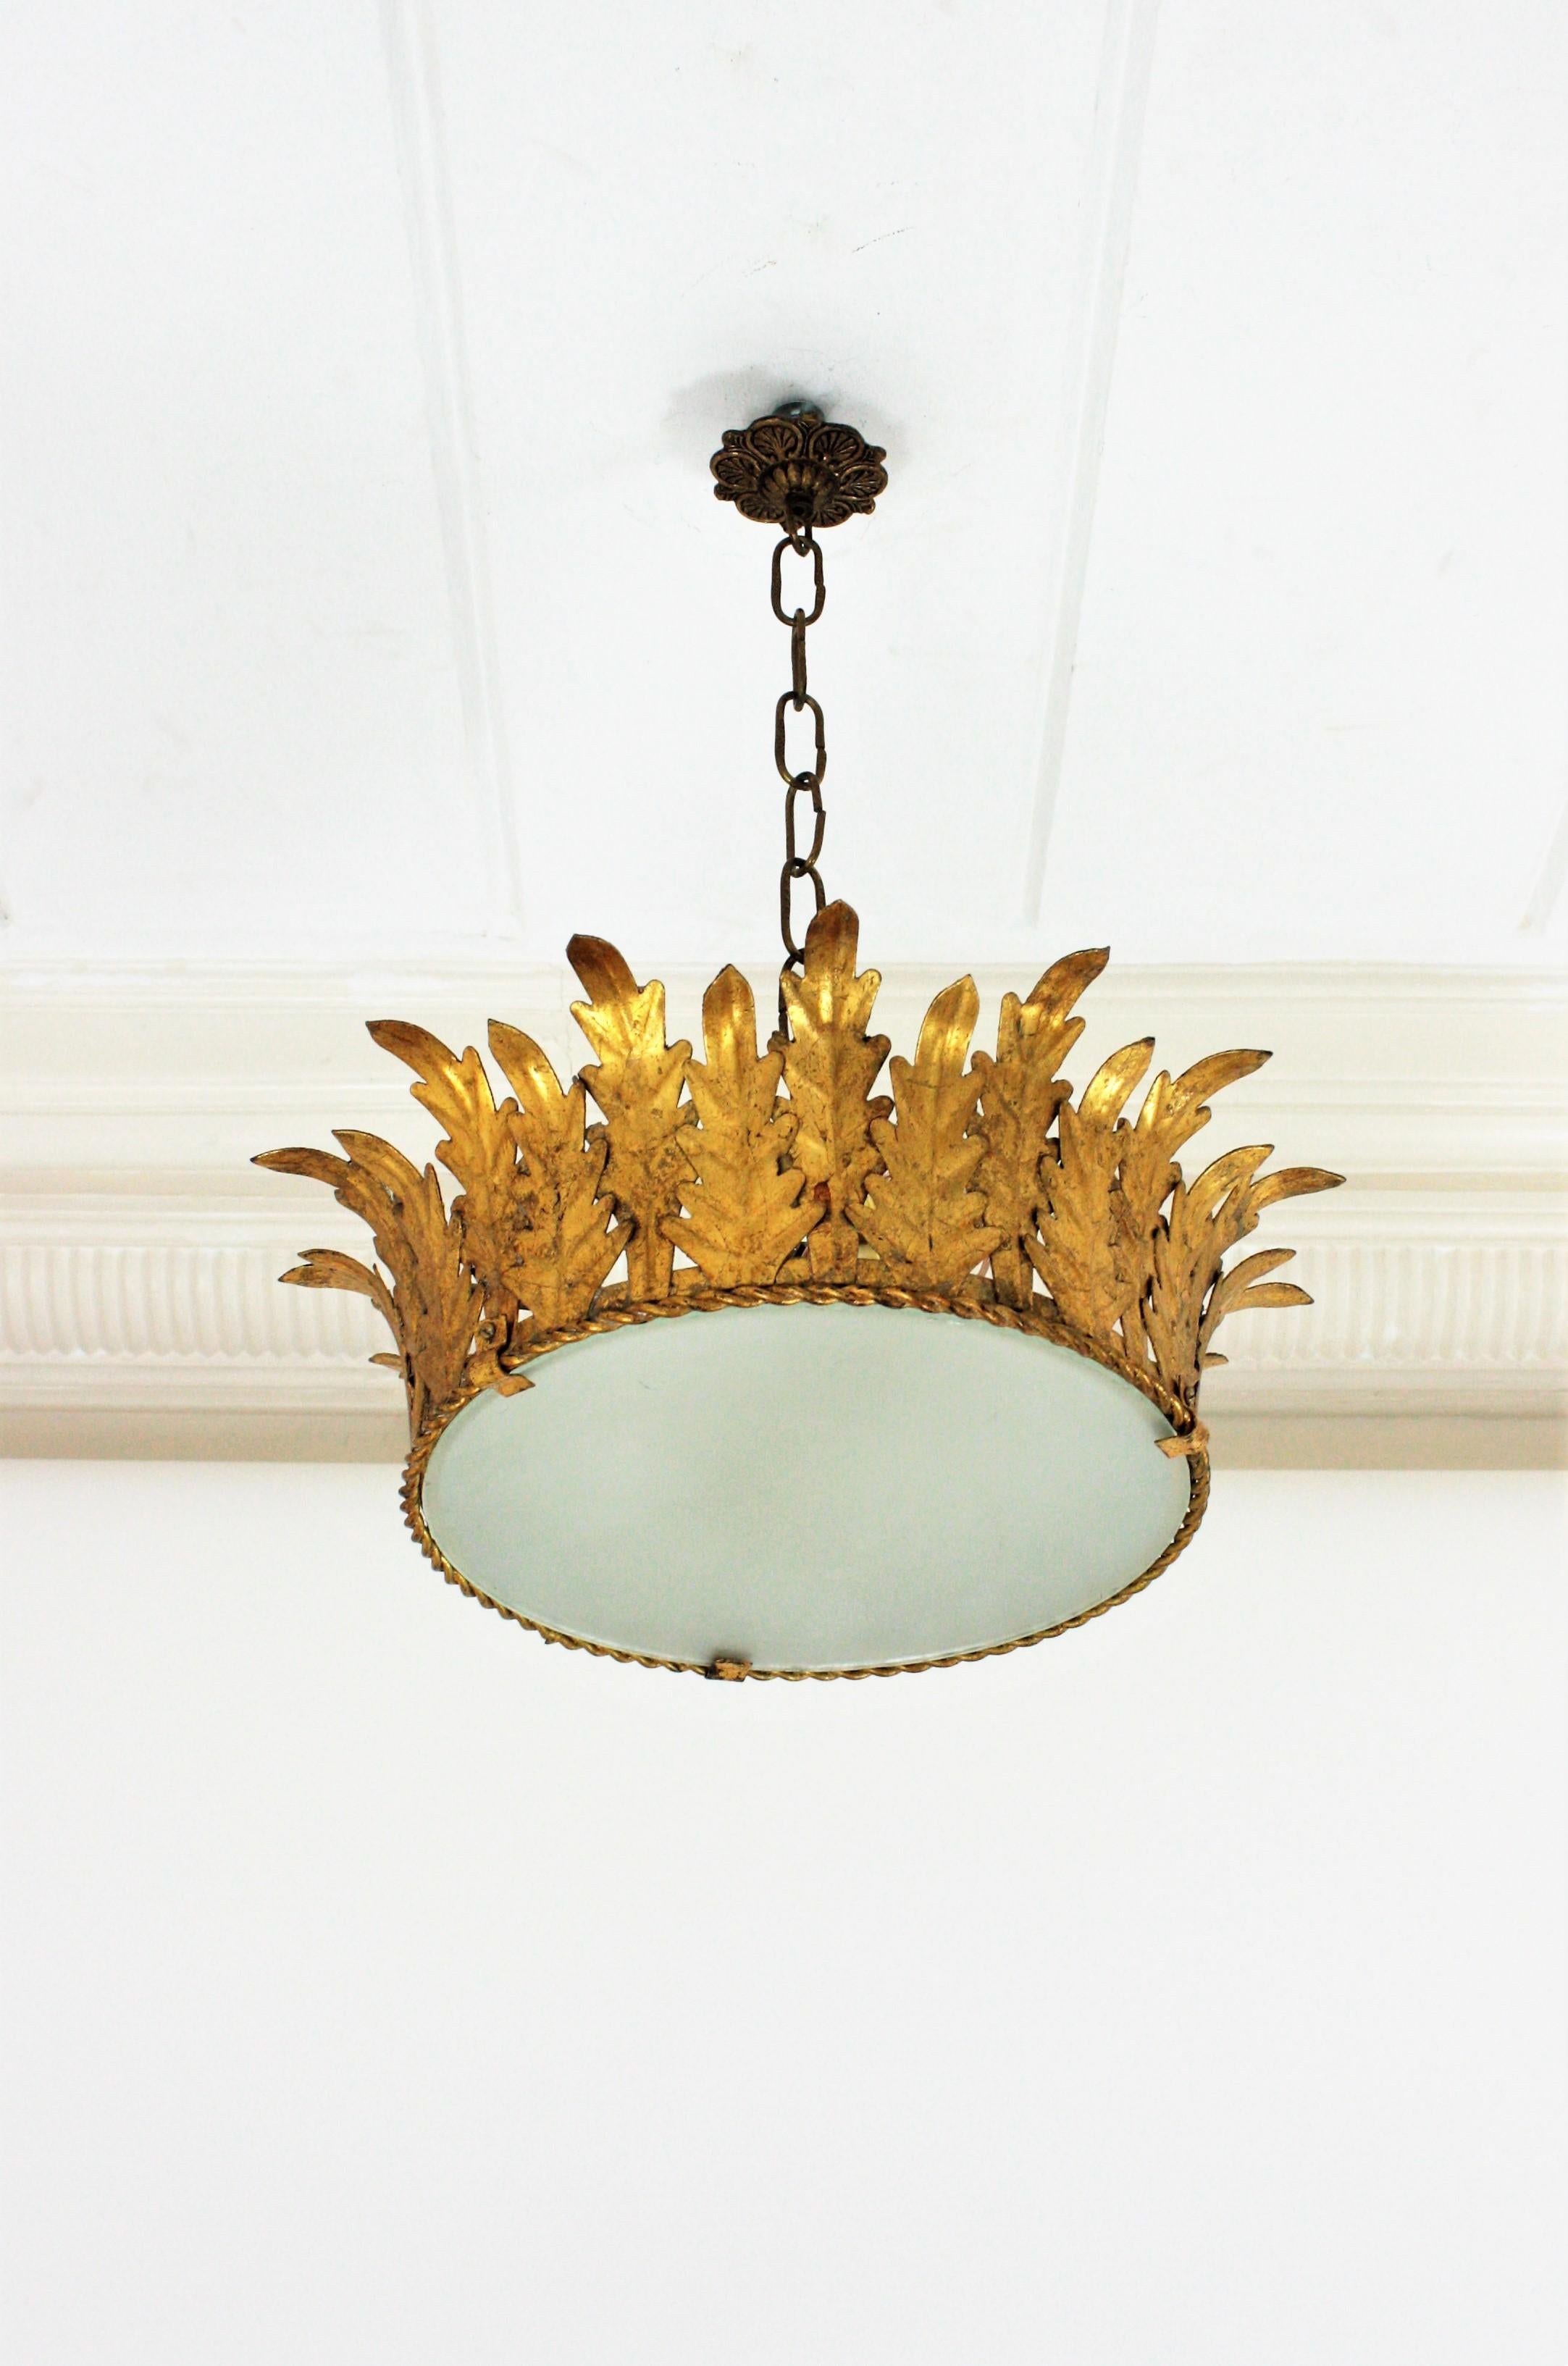 Large Crown Shaped Ceiling Light Fixture or Pendant in Gilt Metal 8